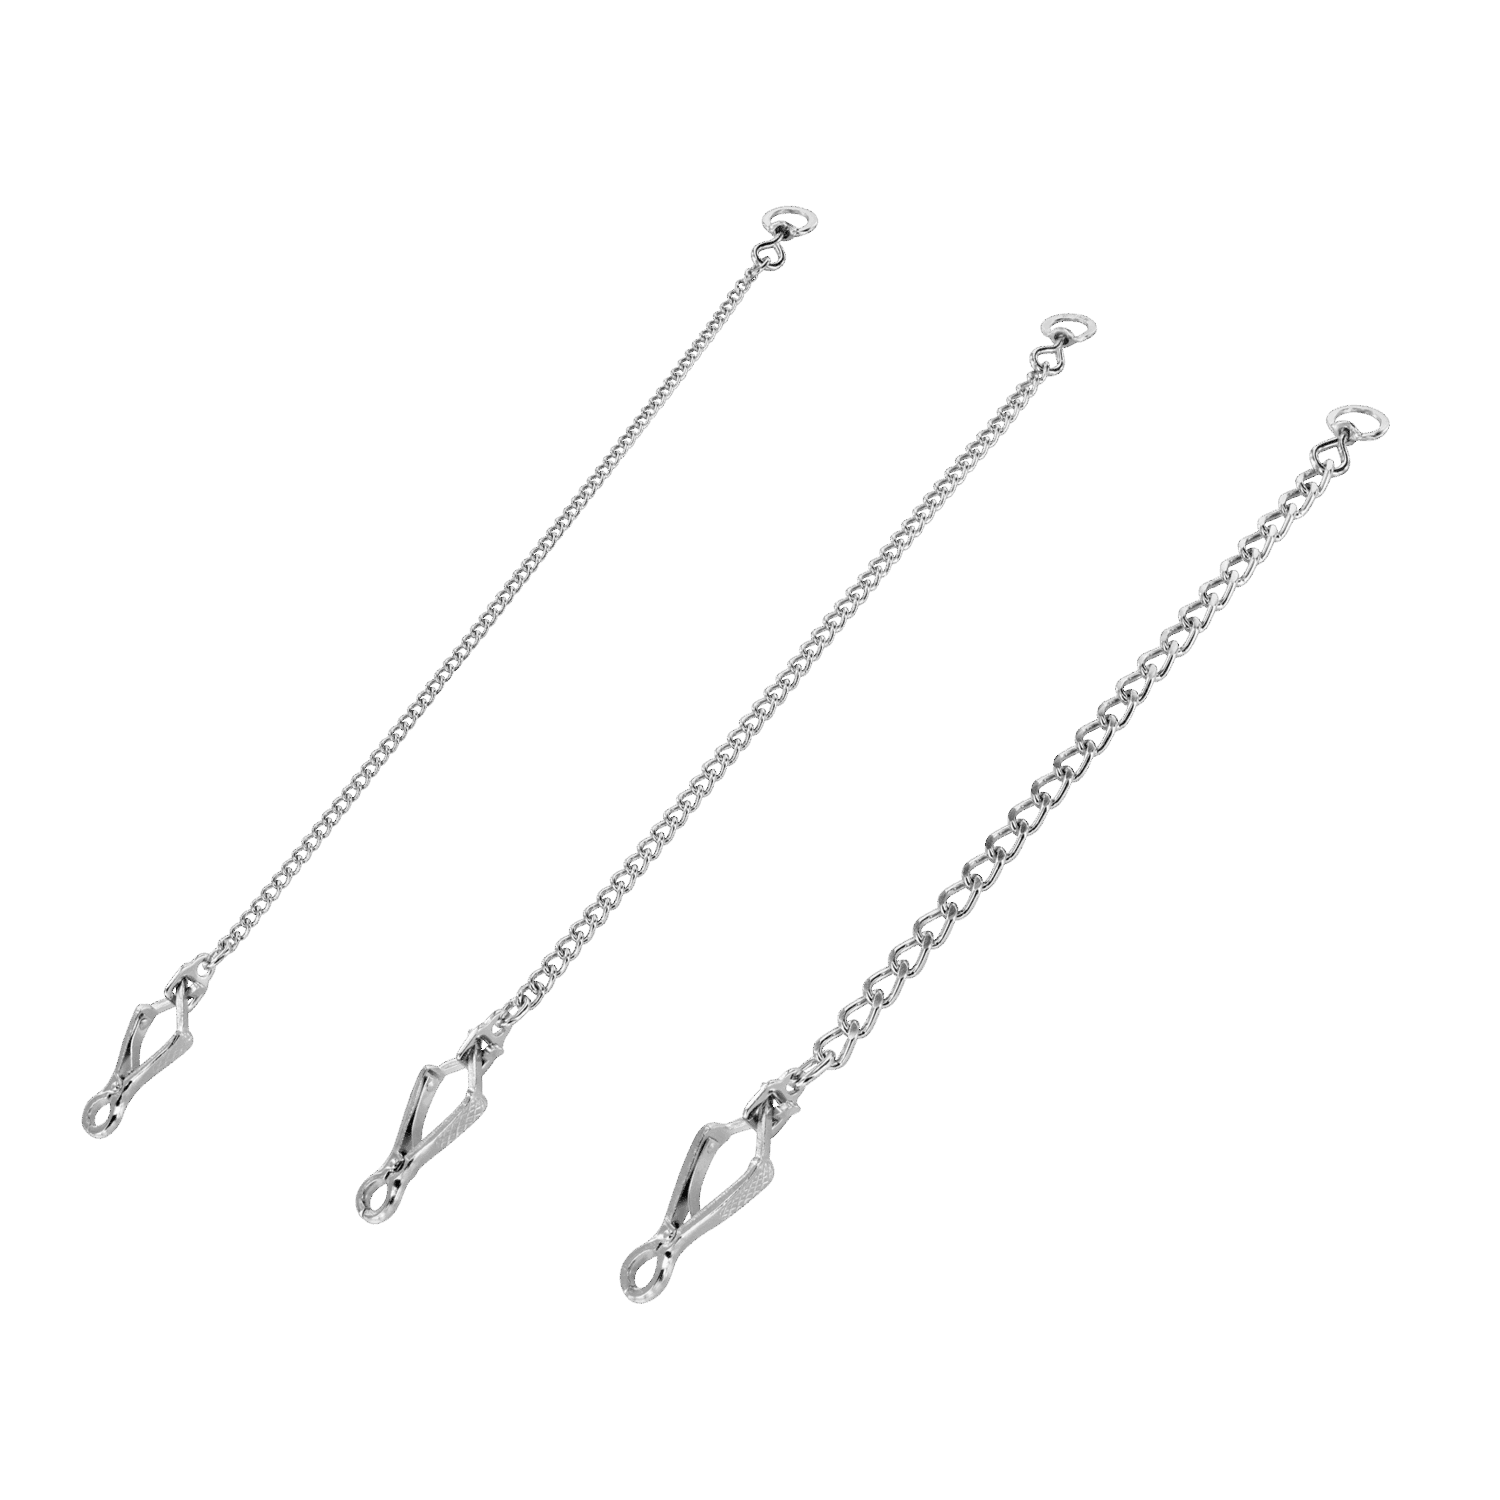 Leash Protection Chain (16") - Steel Chrome-Plated